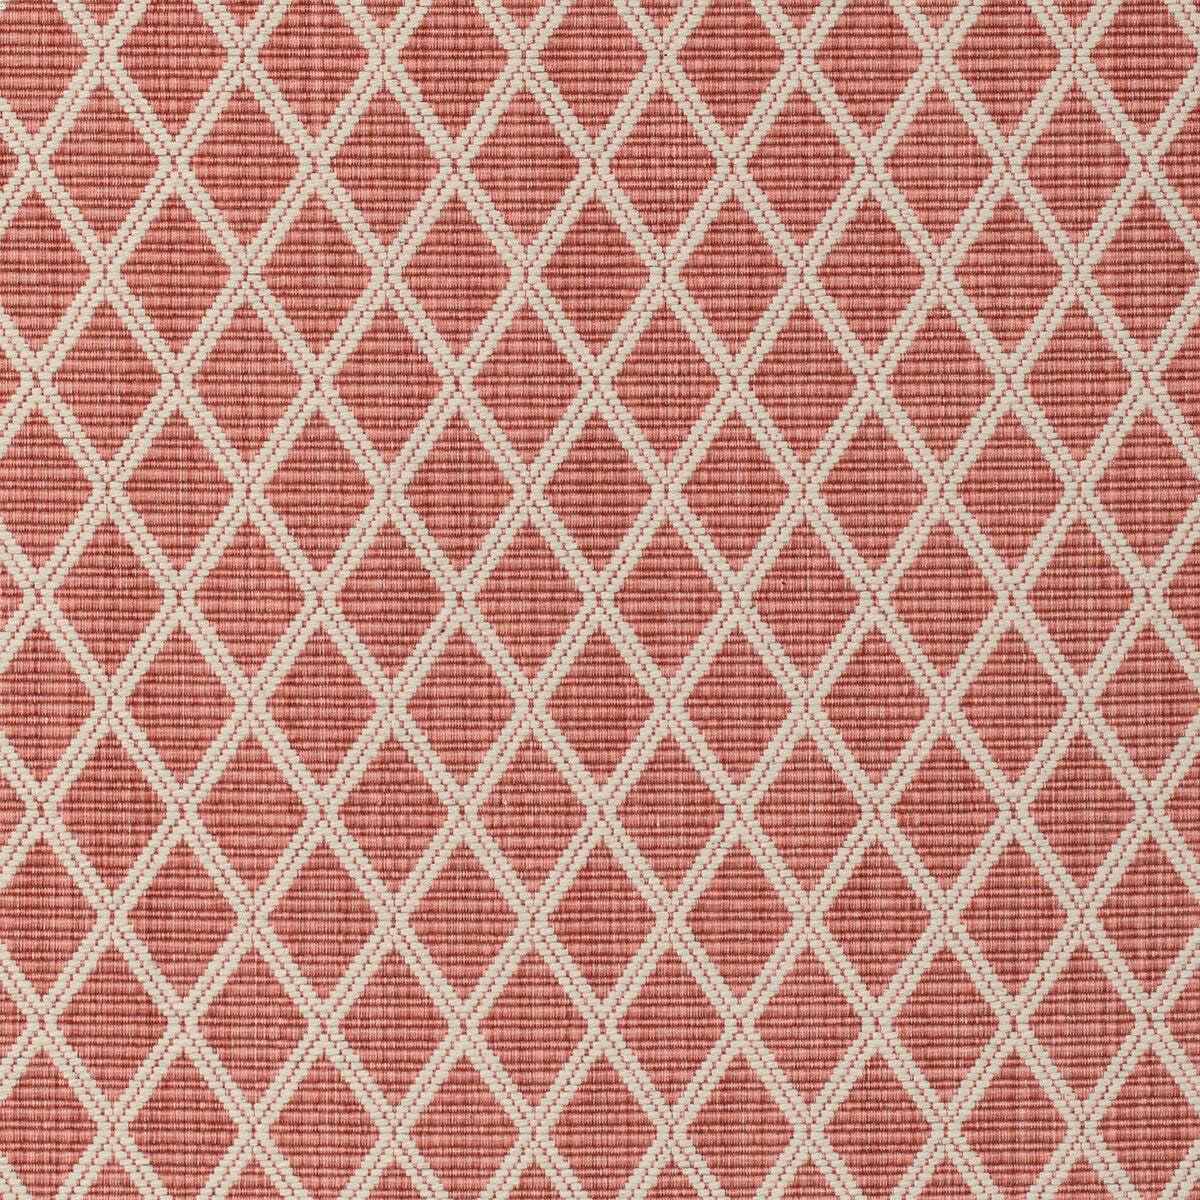 Cancale Woven fabric in berry color - pattern 8020109.77.0 - by Brunschwig &amp; Fils in the Granville Weaves collection